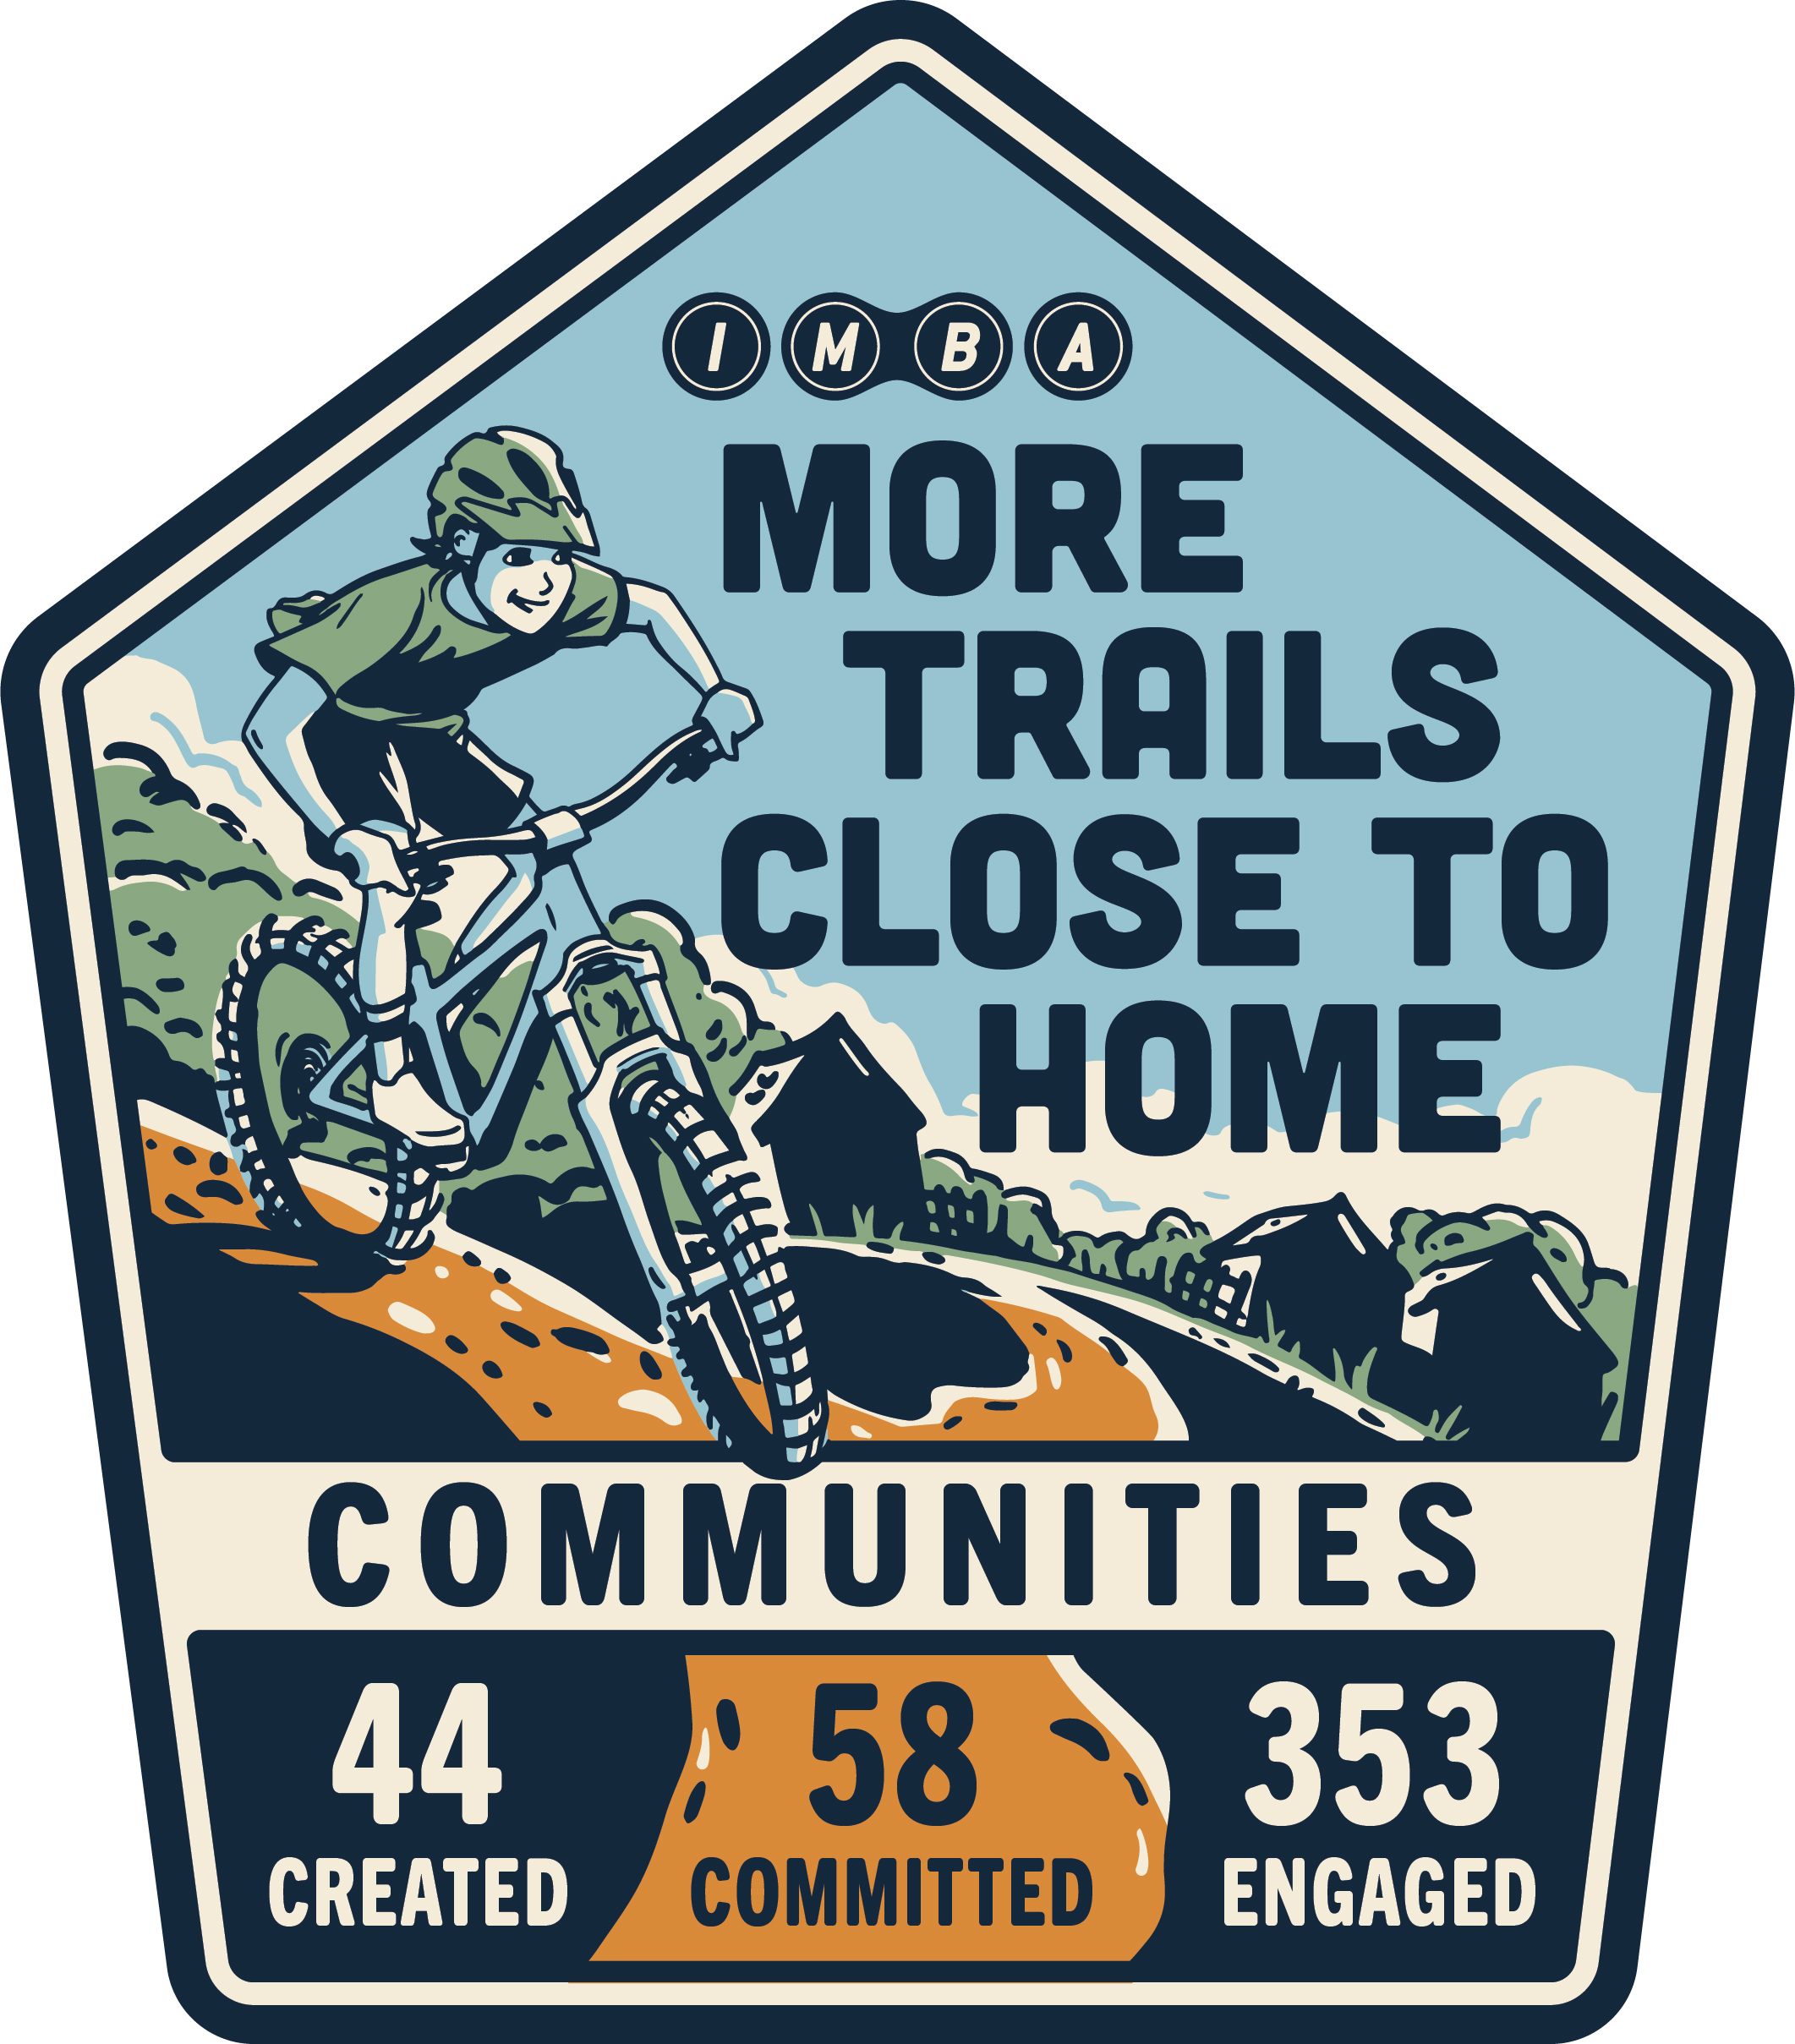 A badge for More Trails Close to Home shows the image of a mountain biker on a trail and notes 44 communities where trails have been created, 58 have committed, and 353 have engaged in the process.